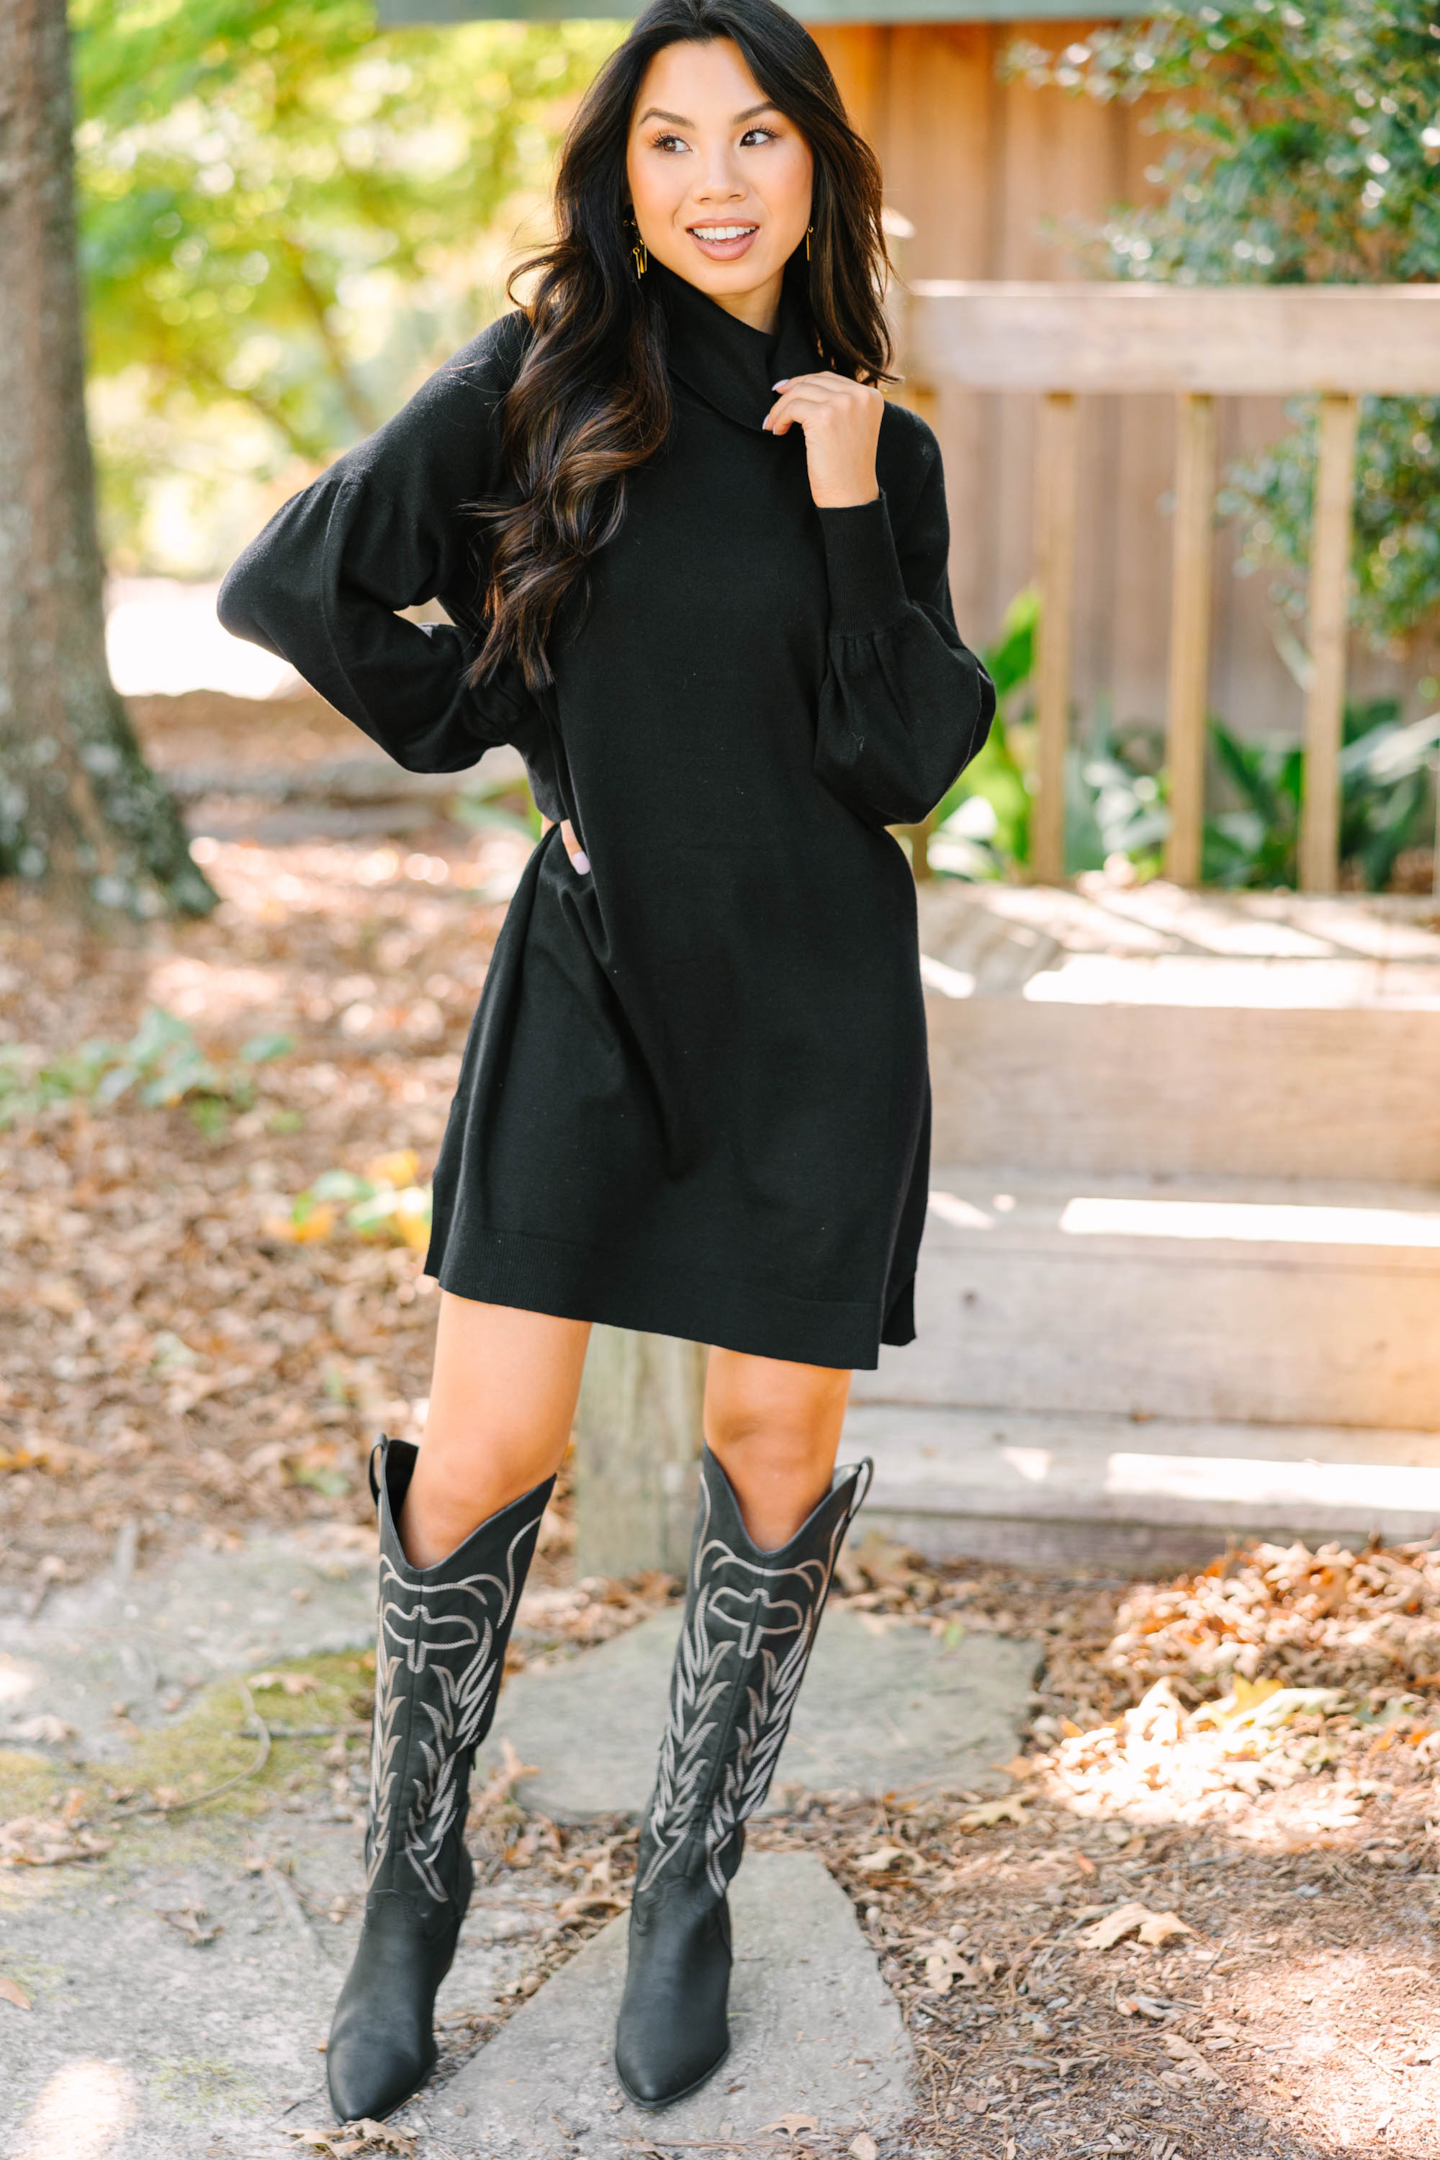 https://shopthemint.com/products/wherever-you-go-black-turtleneck-sweater-dress?variant=39725770637370